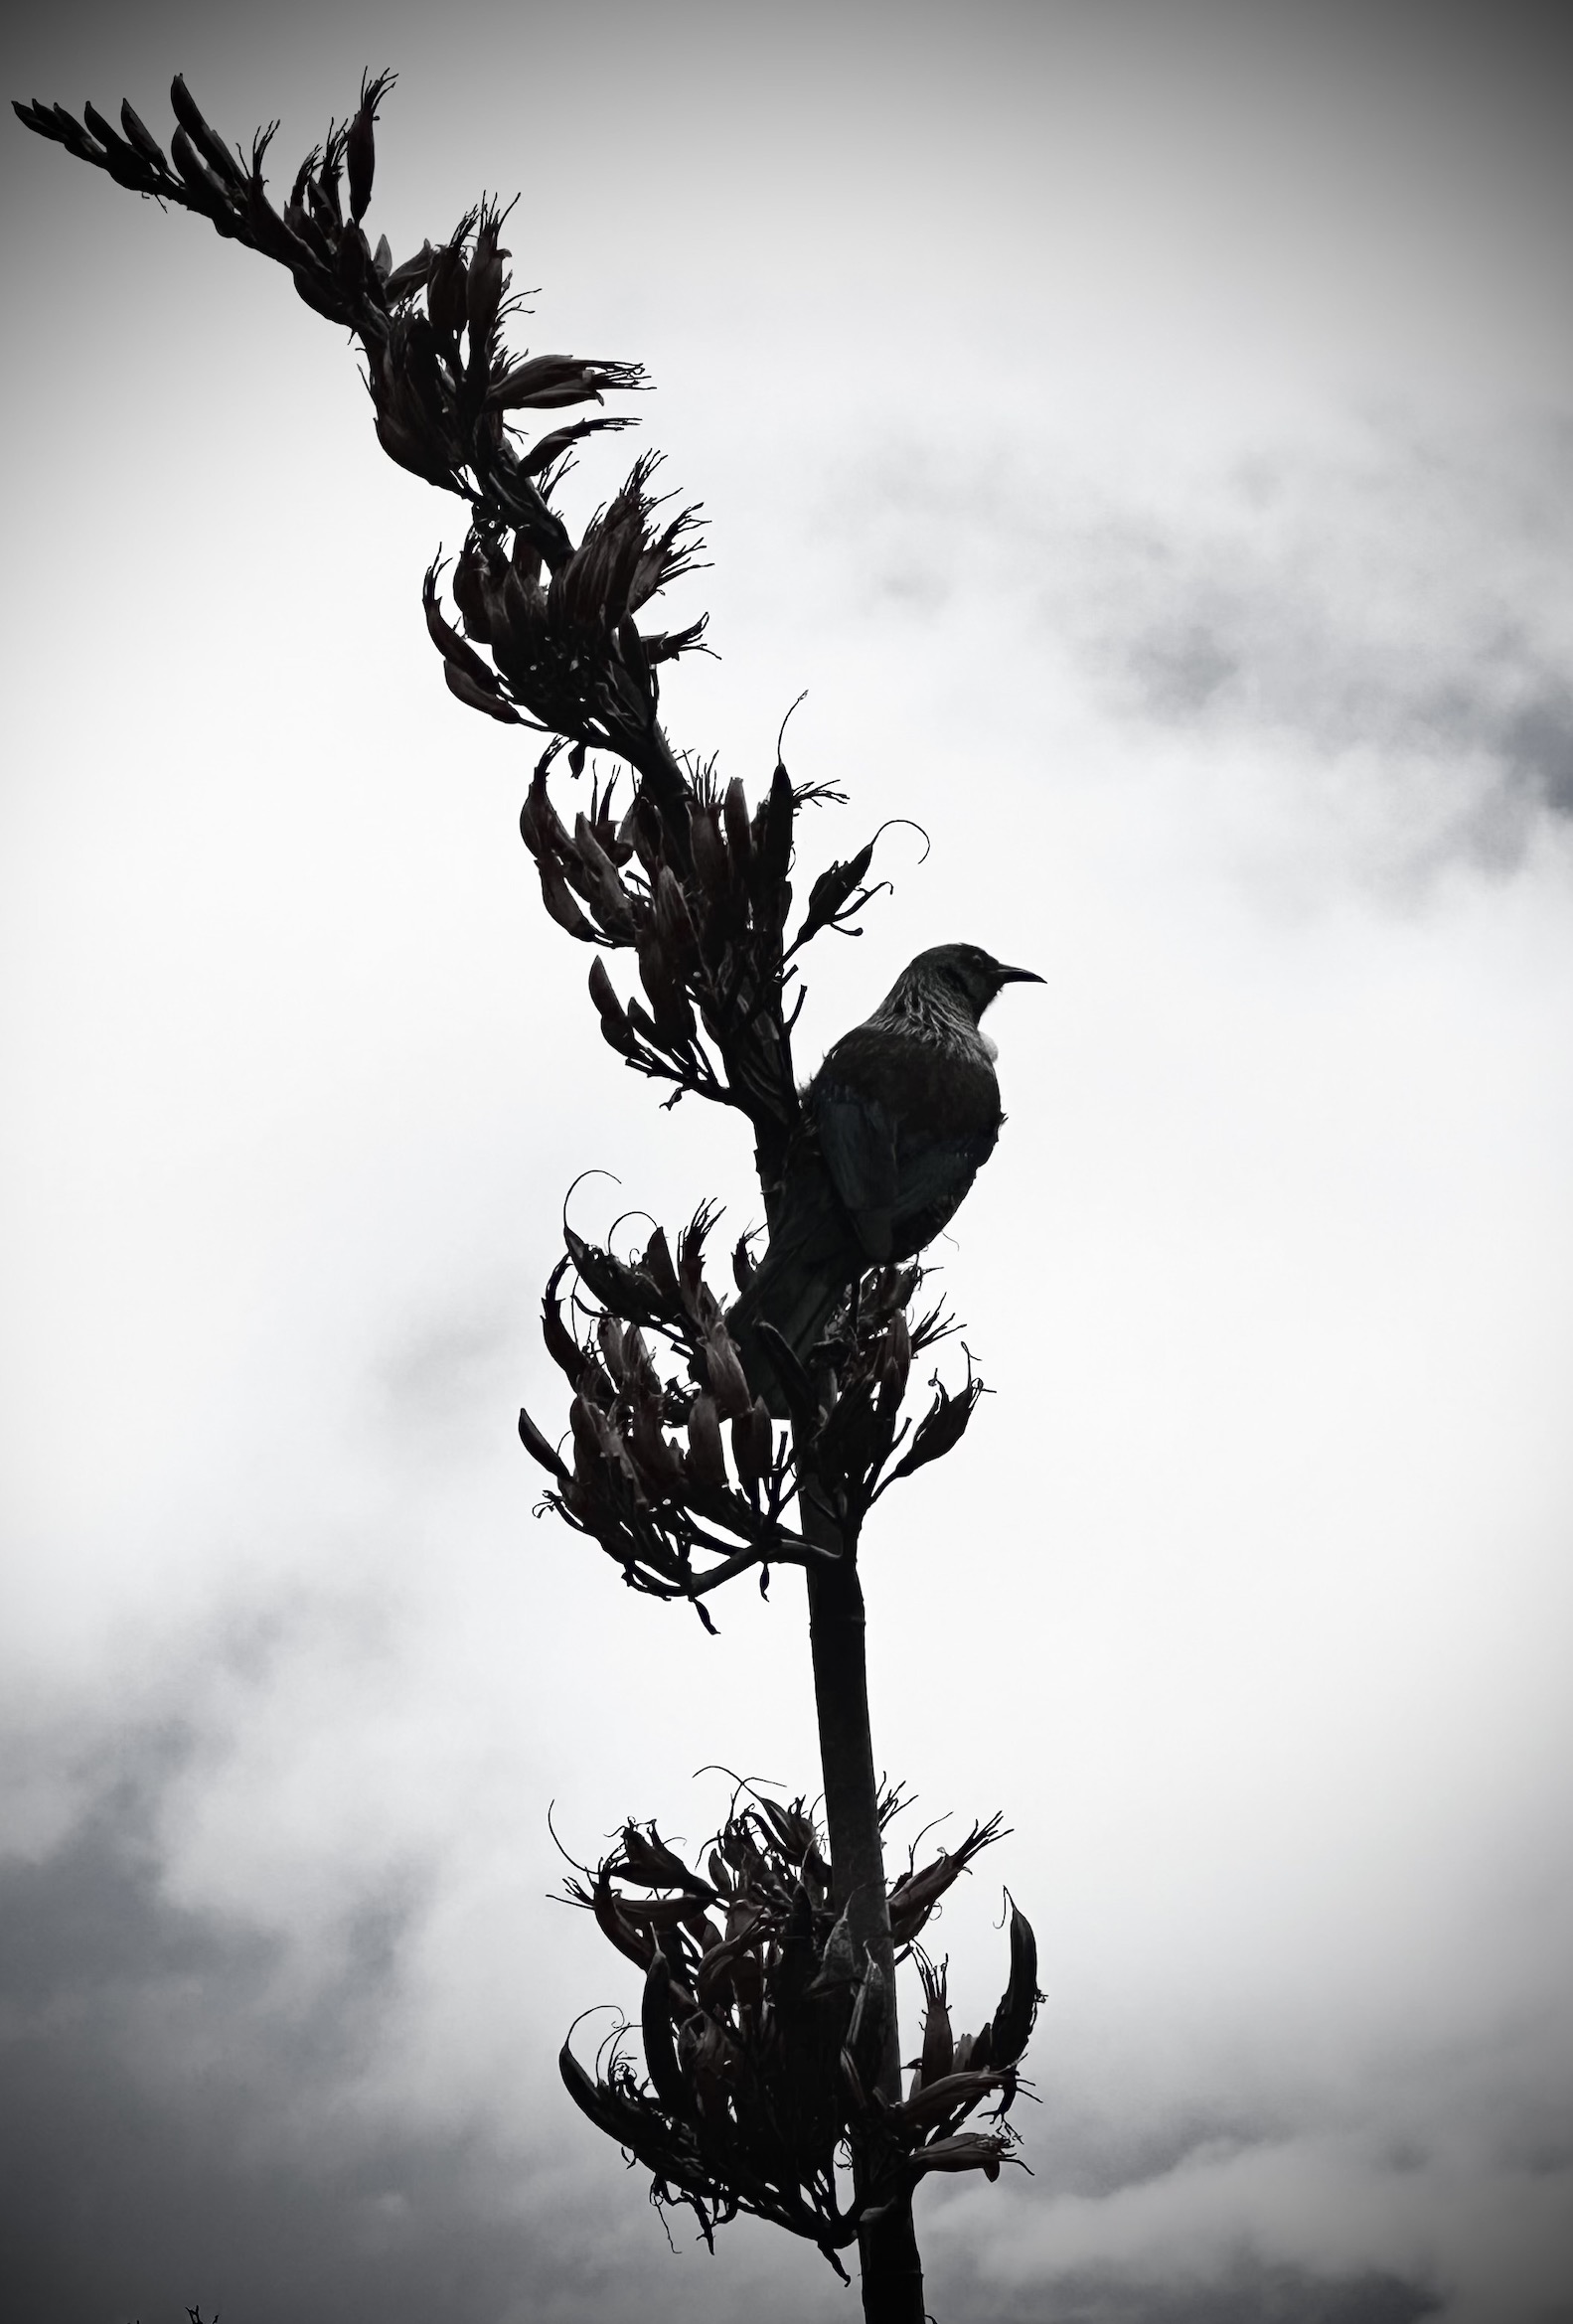 A New Zealand bird, the Tūī. Photographed in black and white